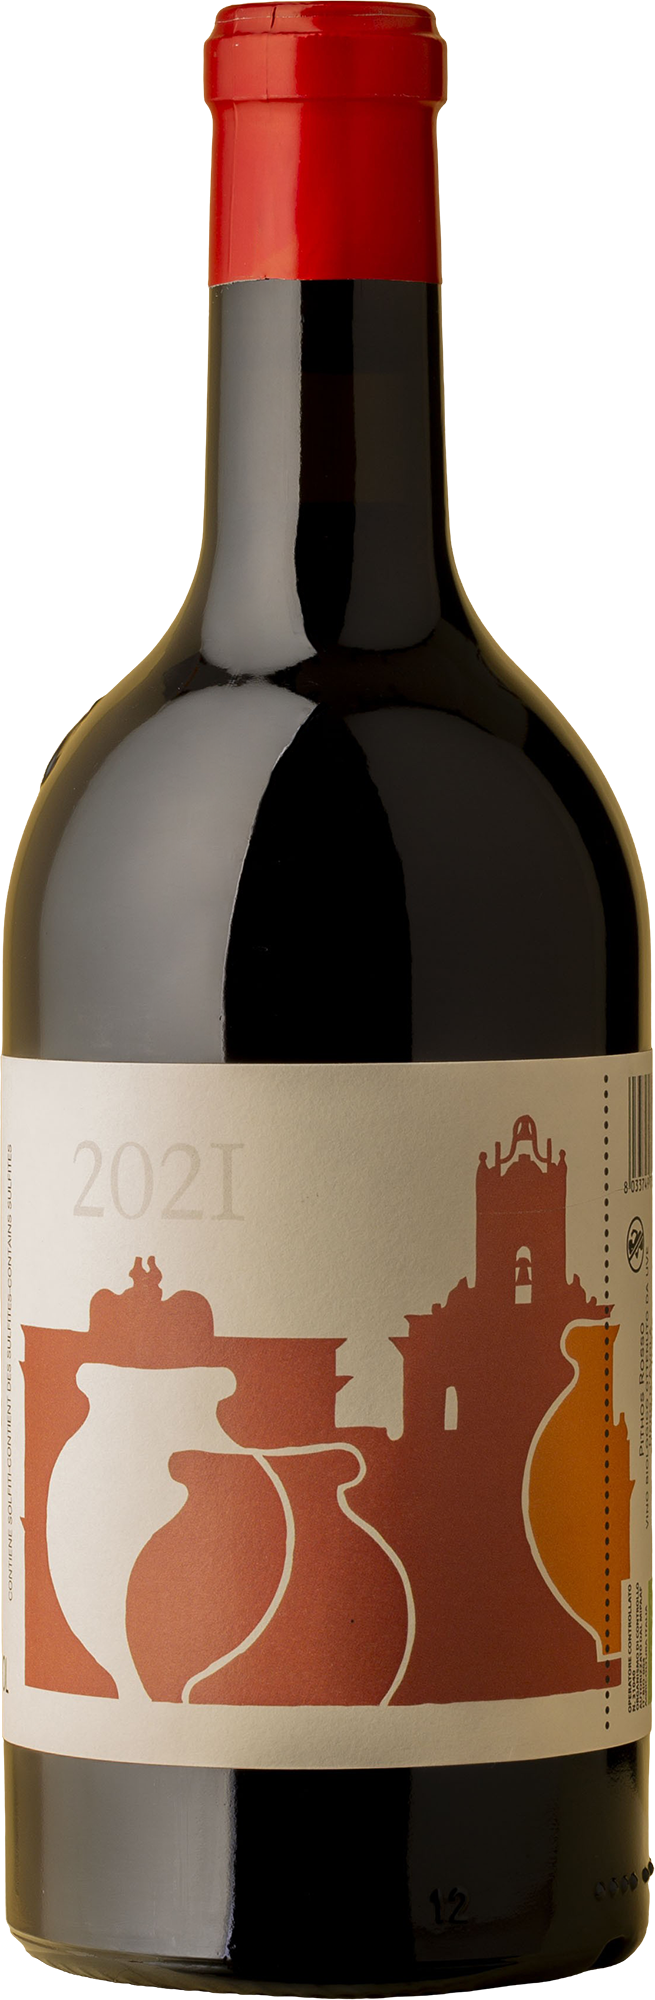 COS - Pithos Rosso Red Blend 2021 Red Wine